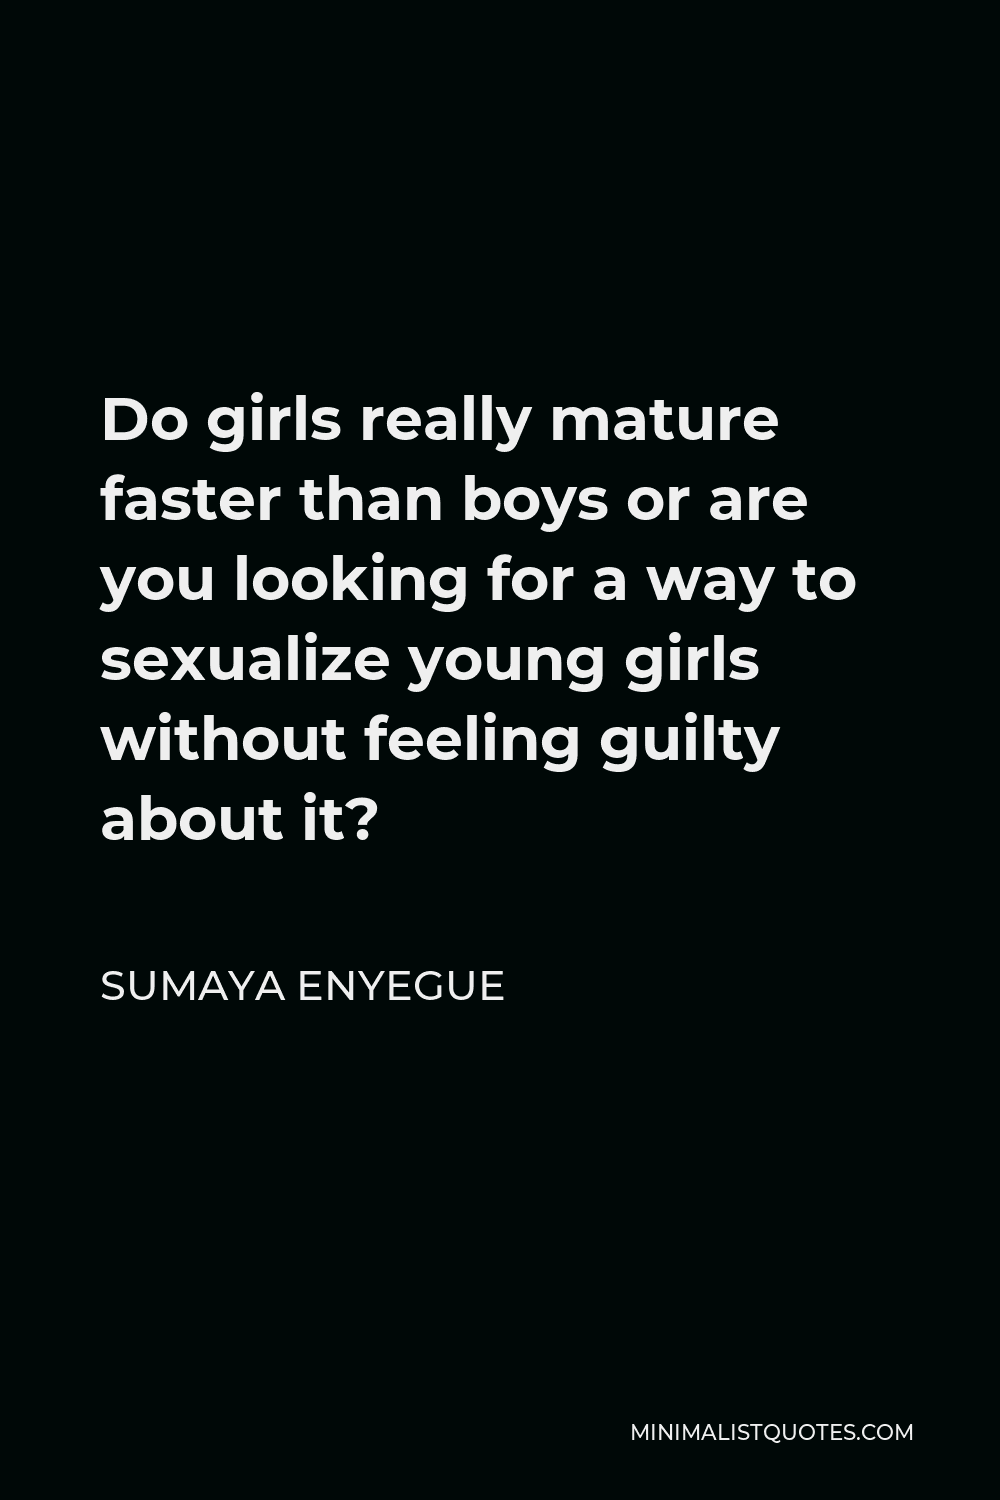 Sumaya Enyegue Quote - Do girls really mature faster than boys or are you looking for a way to sexualize young girls without feeling guilty about it?